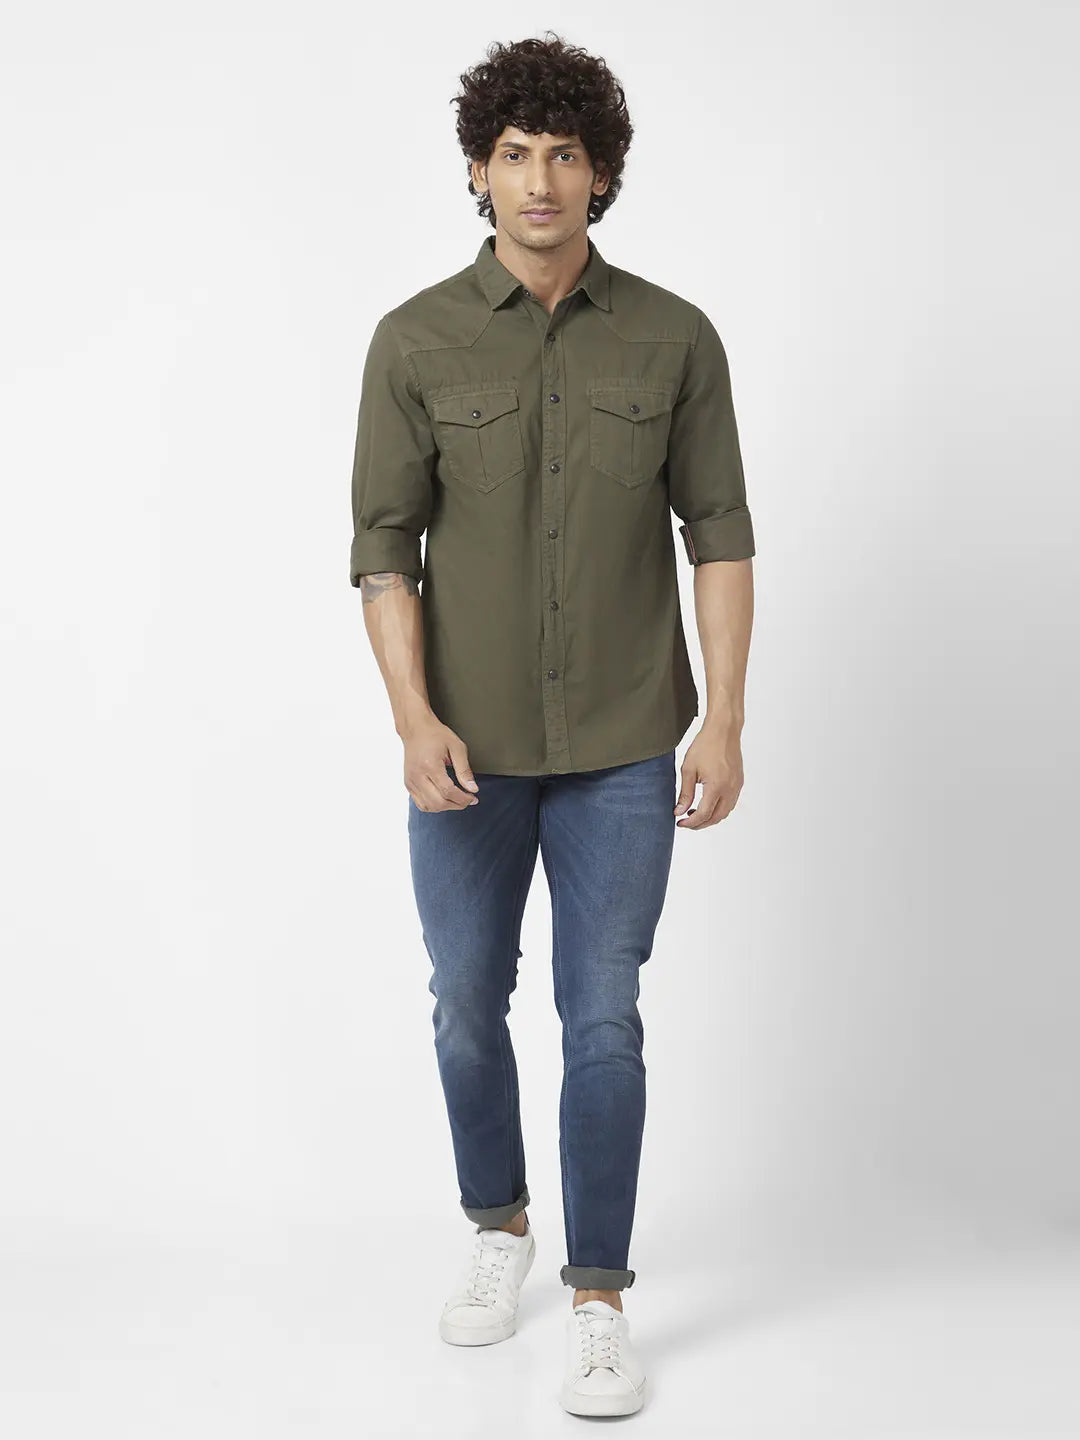 Pin on Mens casual outfits